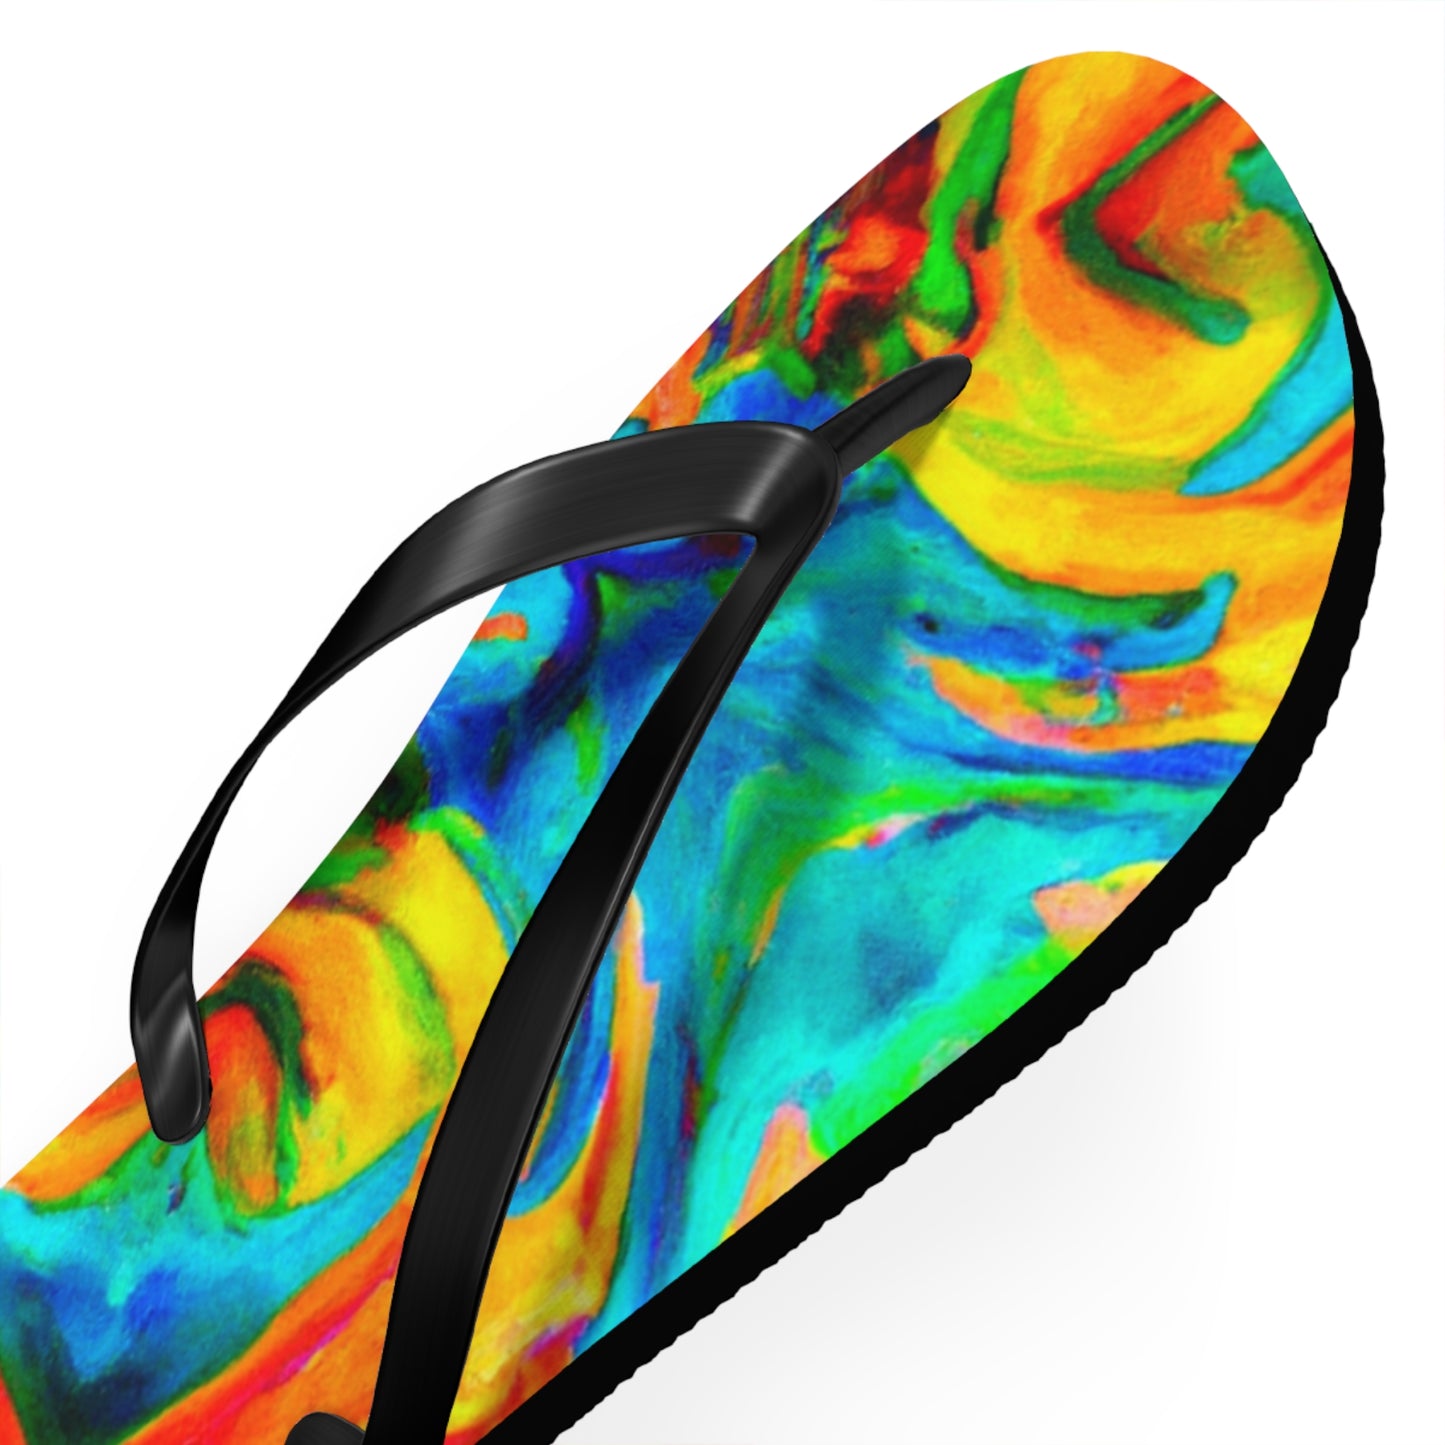 's name

Fenella Fitcheringshoes - Psychedelic Trippy Flip Flop Beach Sandals